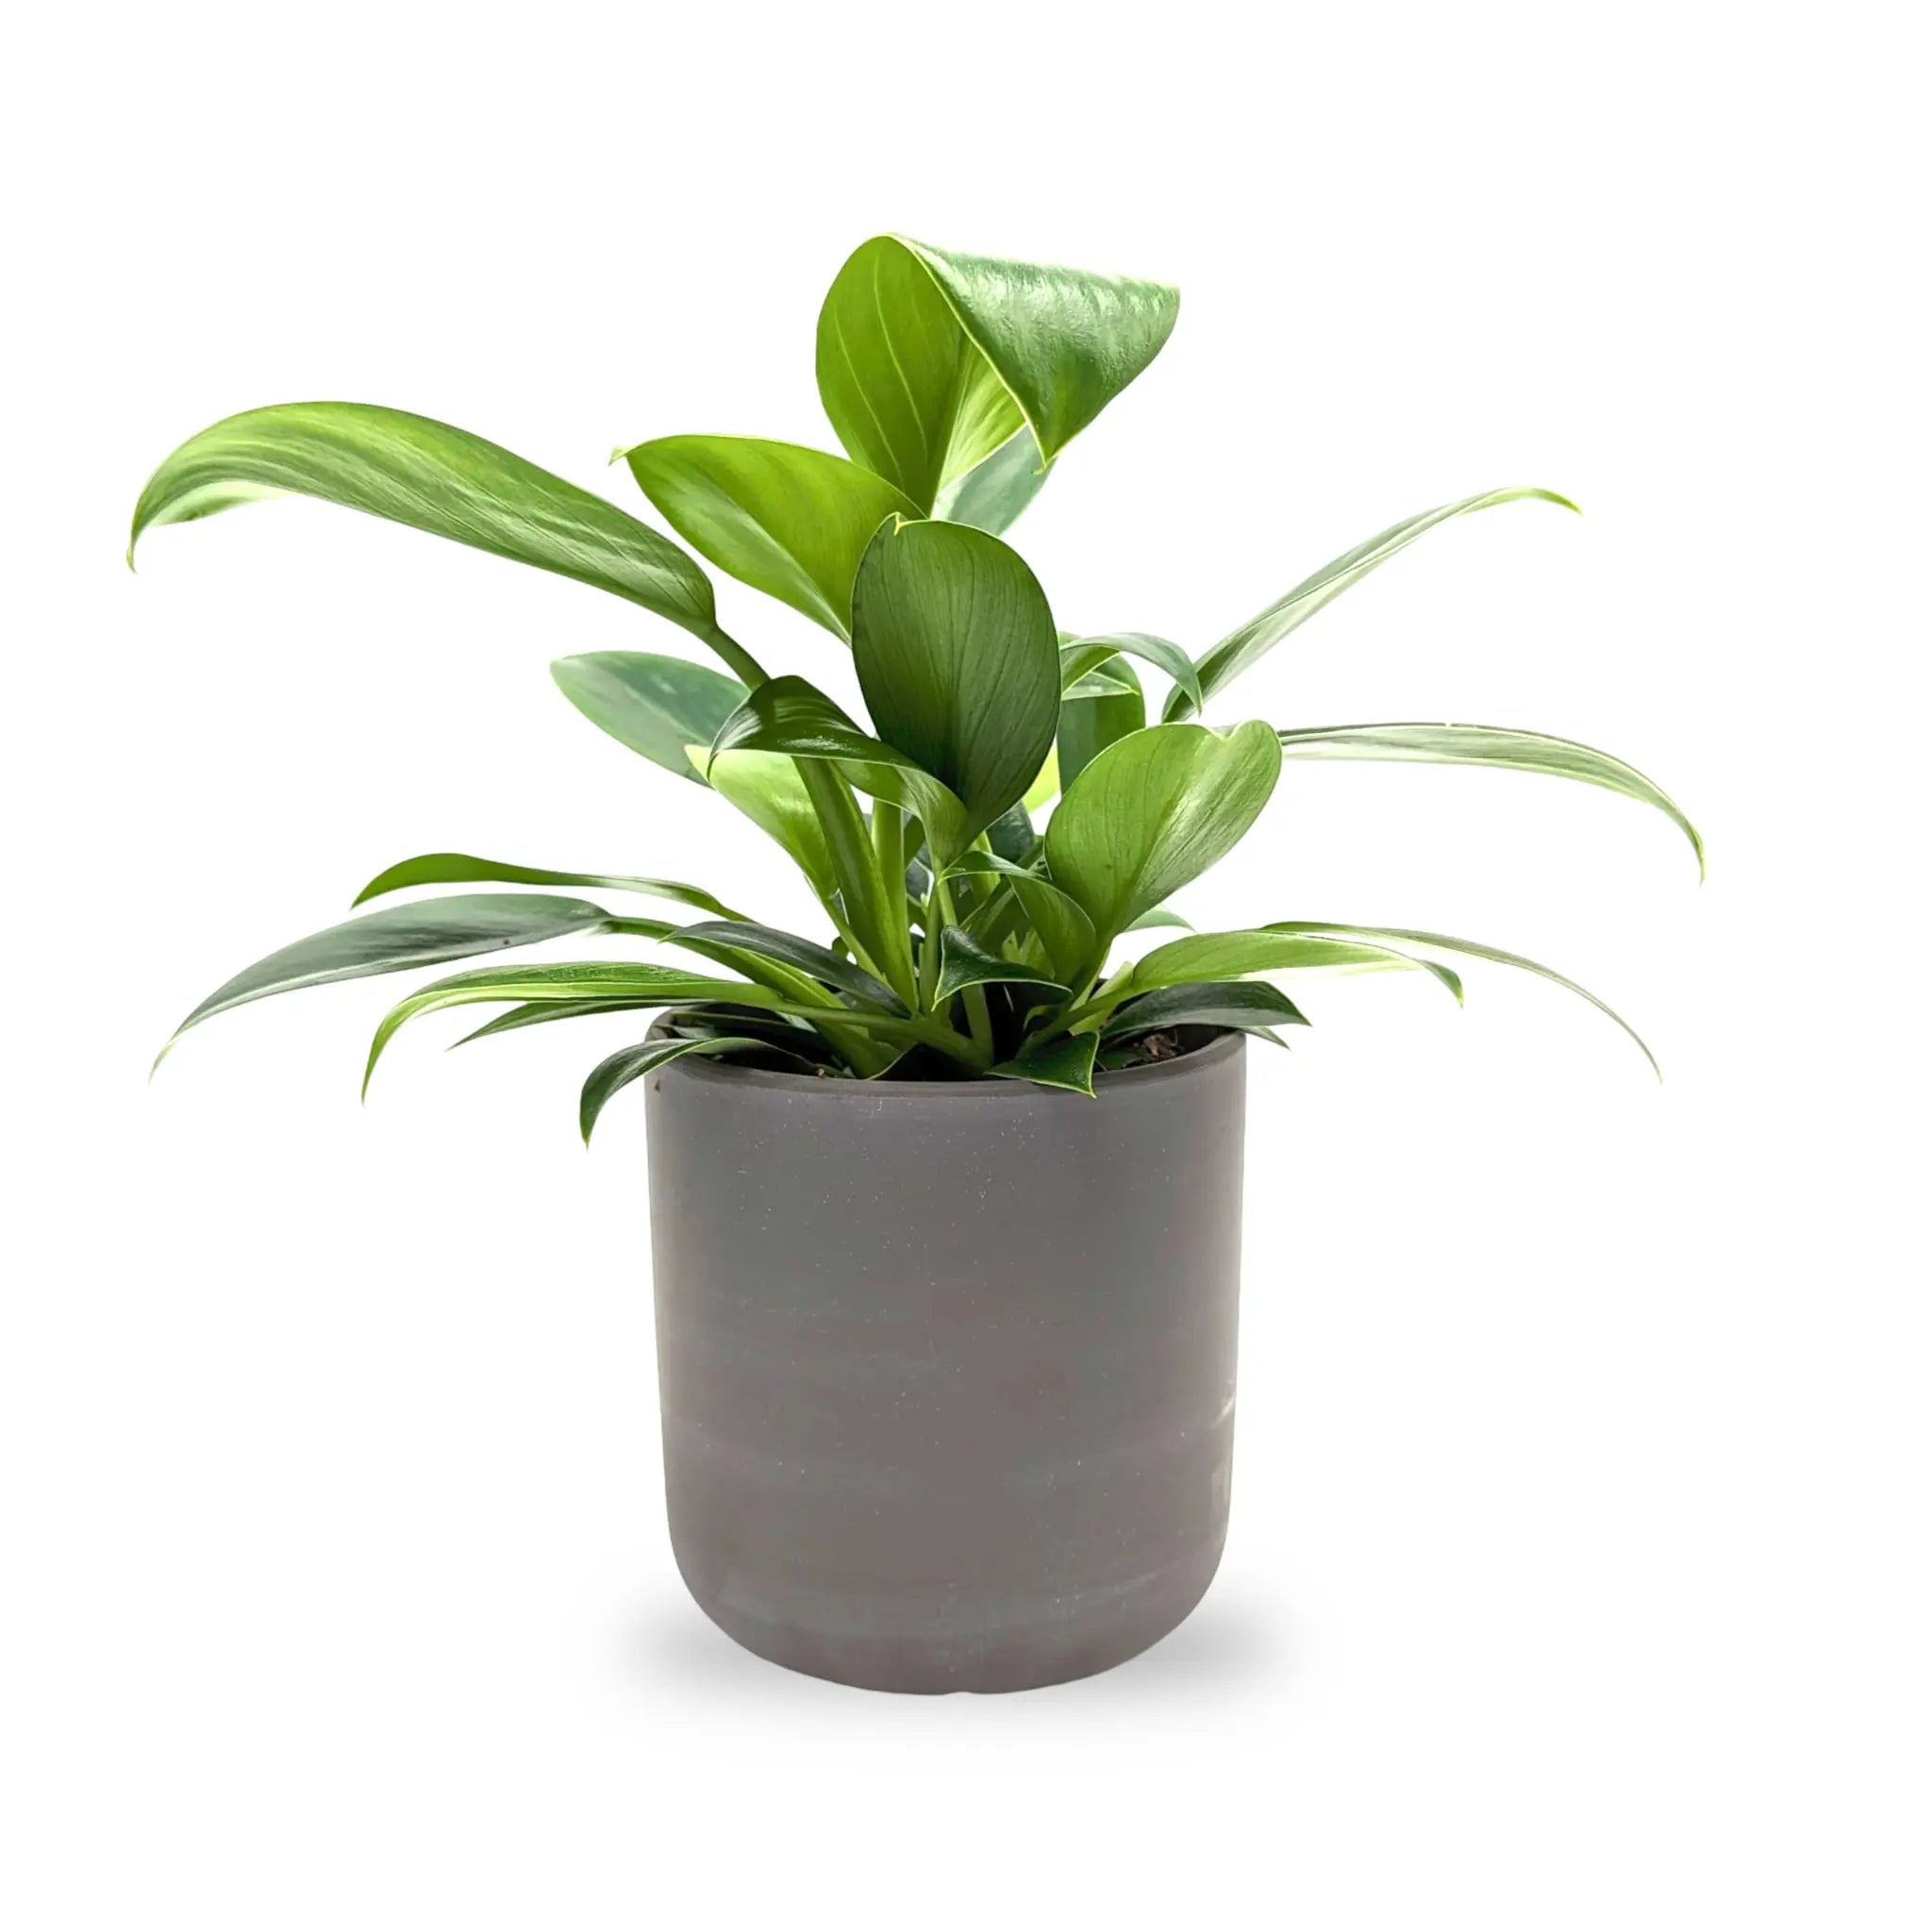 Philodendron Green Princess in Grey Pot - Silk Plant Leaf Culture